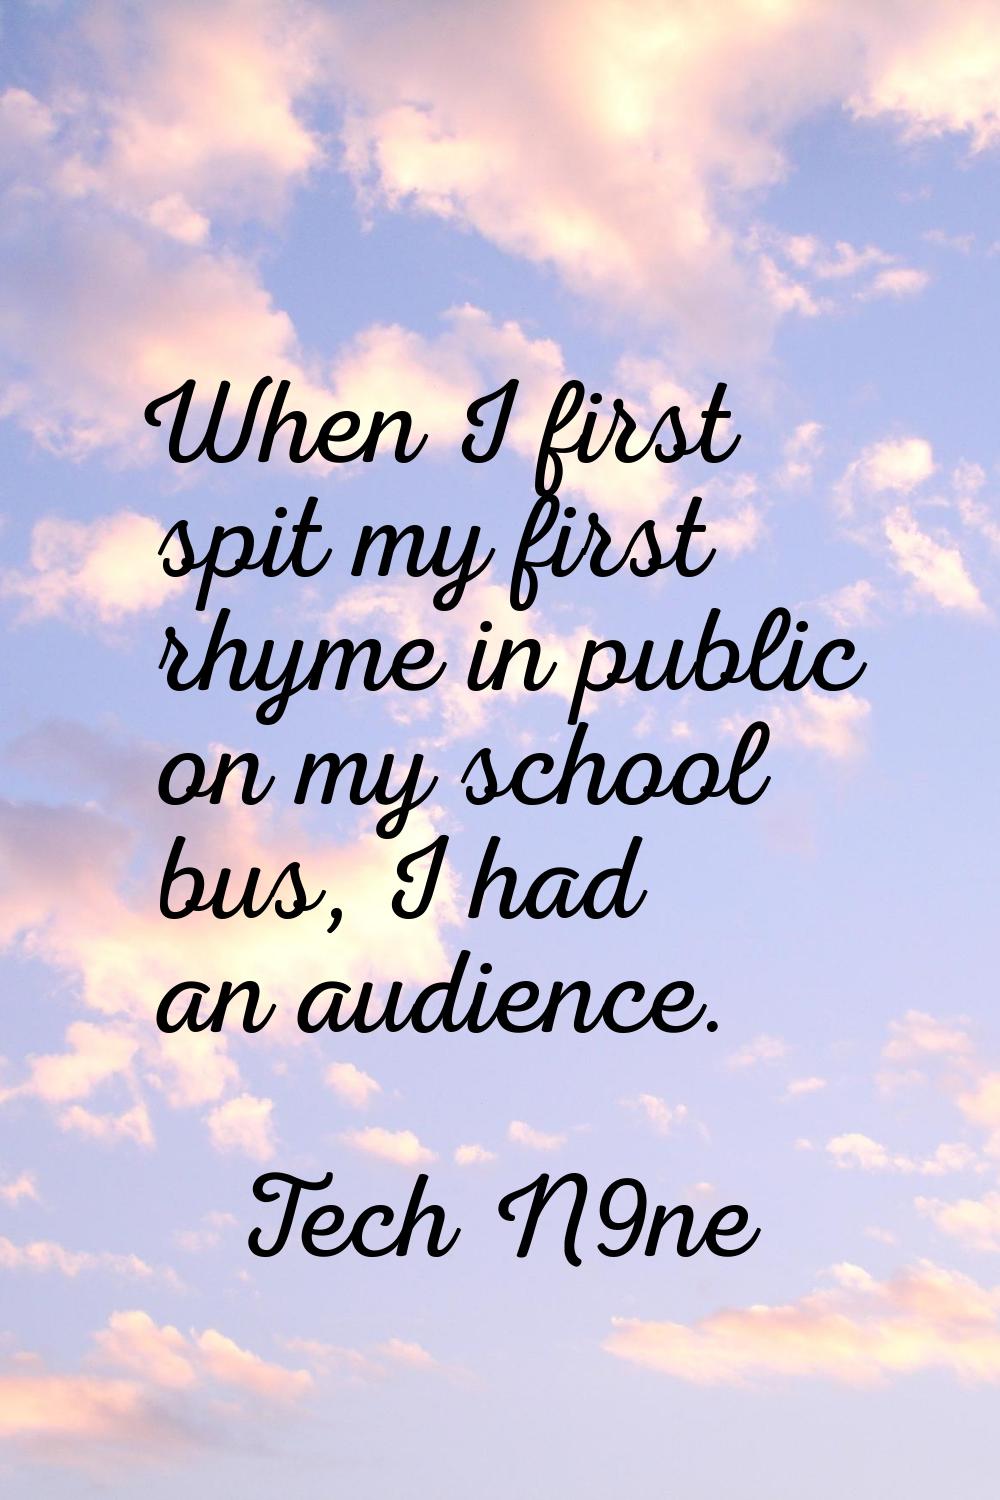 When I first spit my first rhyme in public on my school bus, I had an audience.